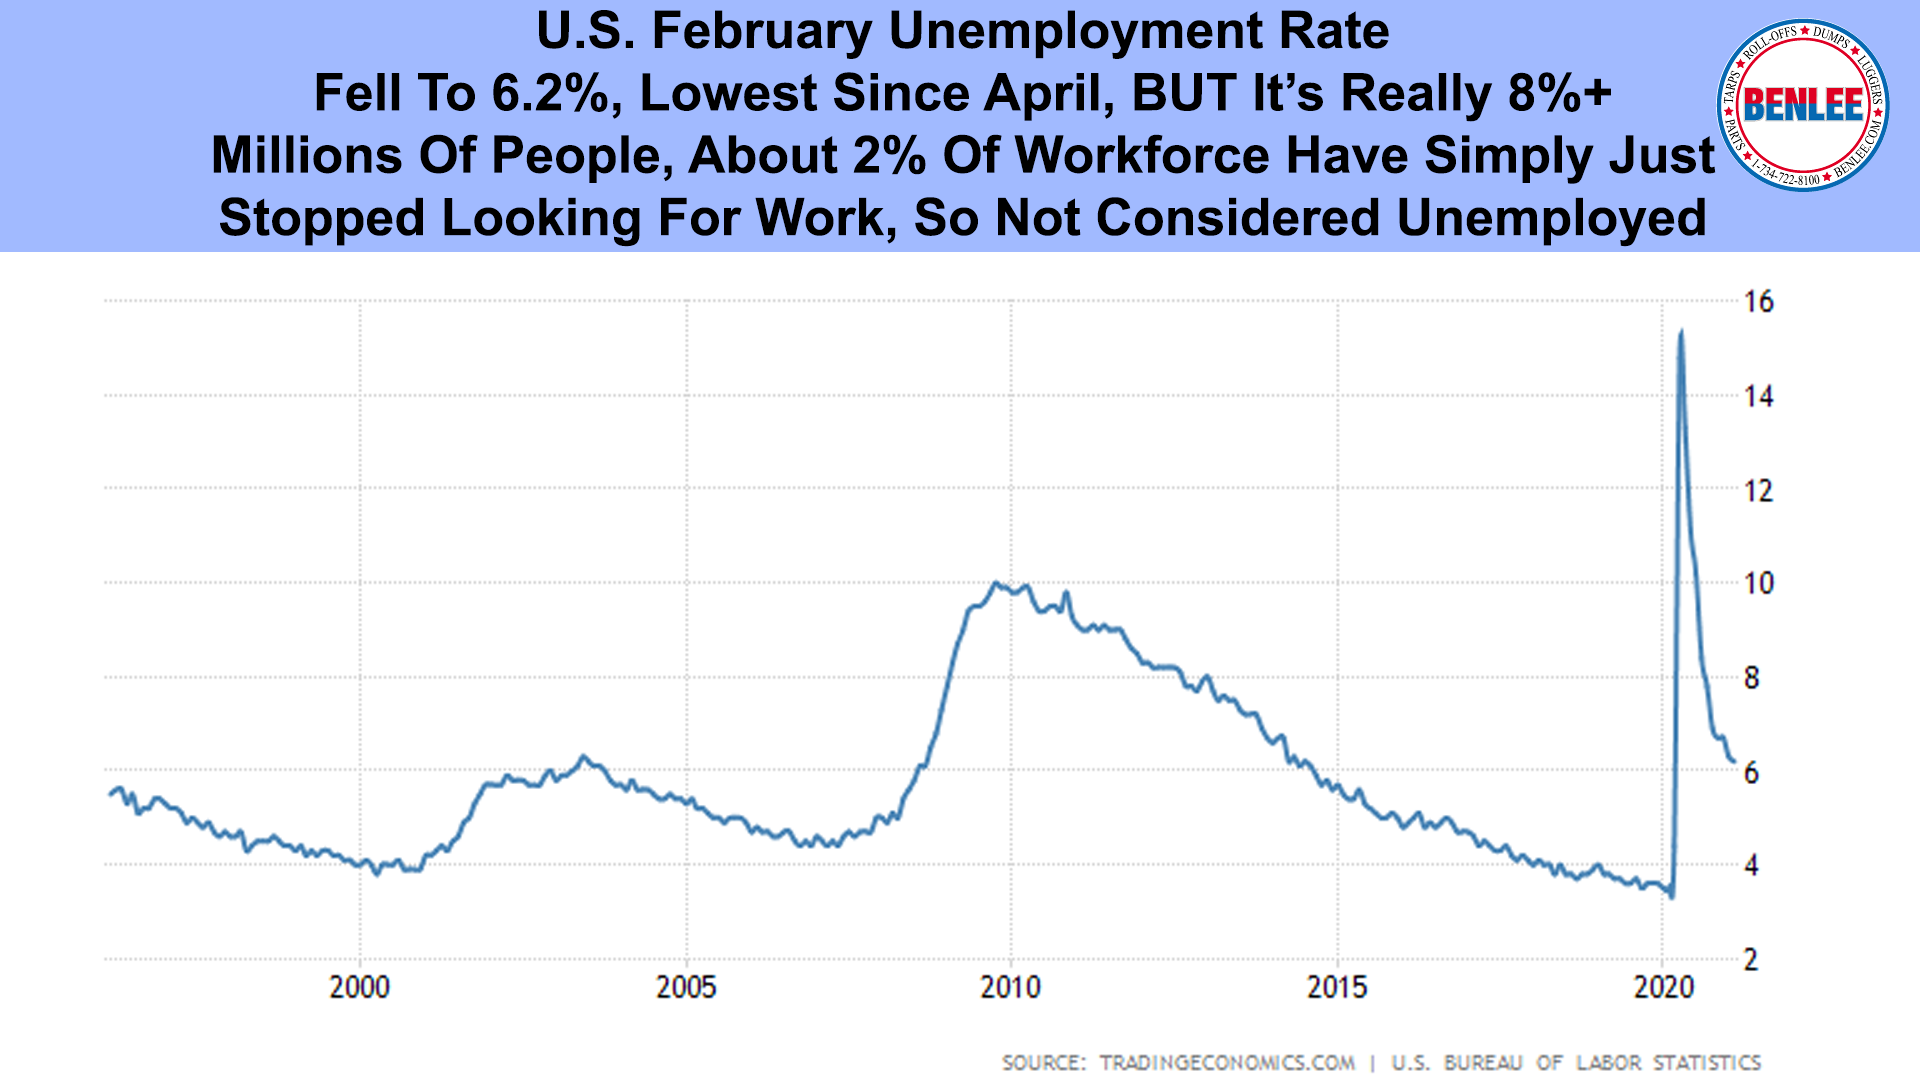 U.S. February Unemployment Rate